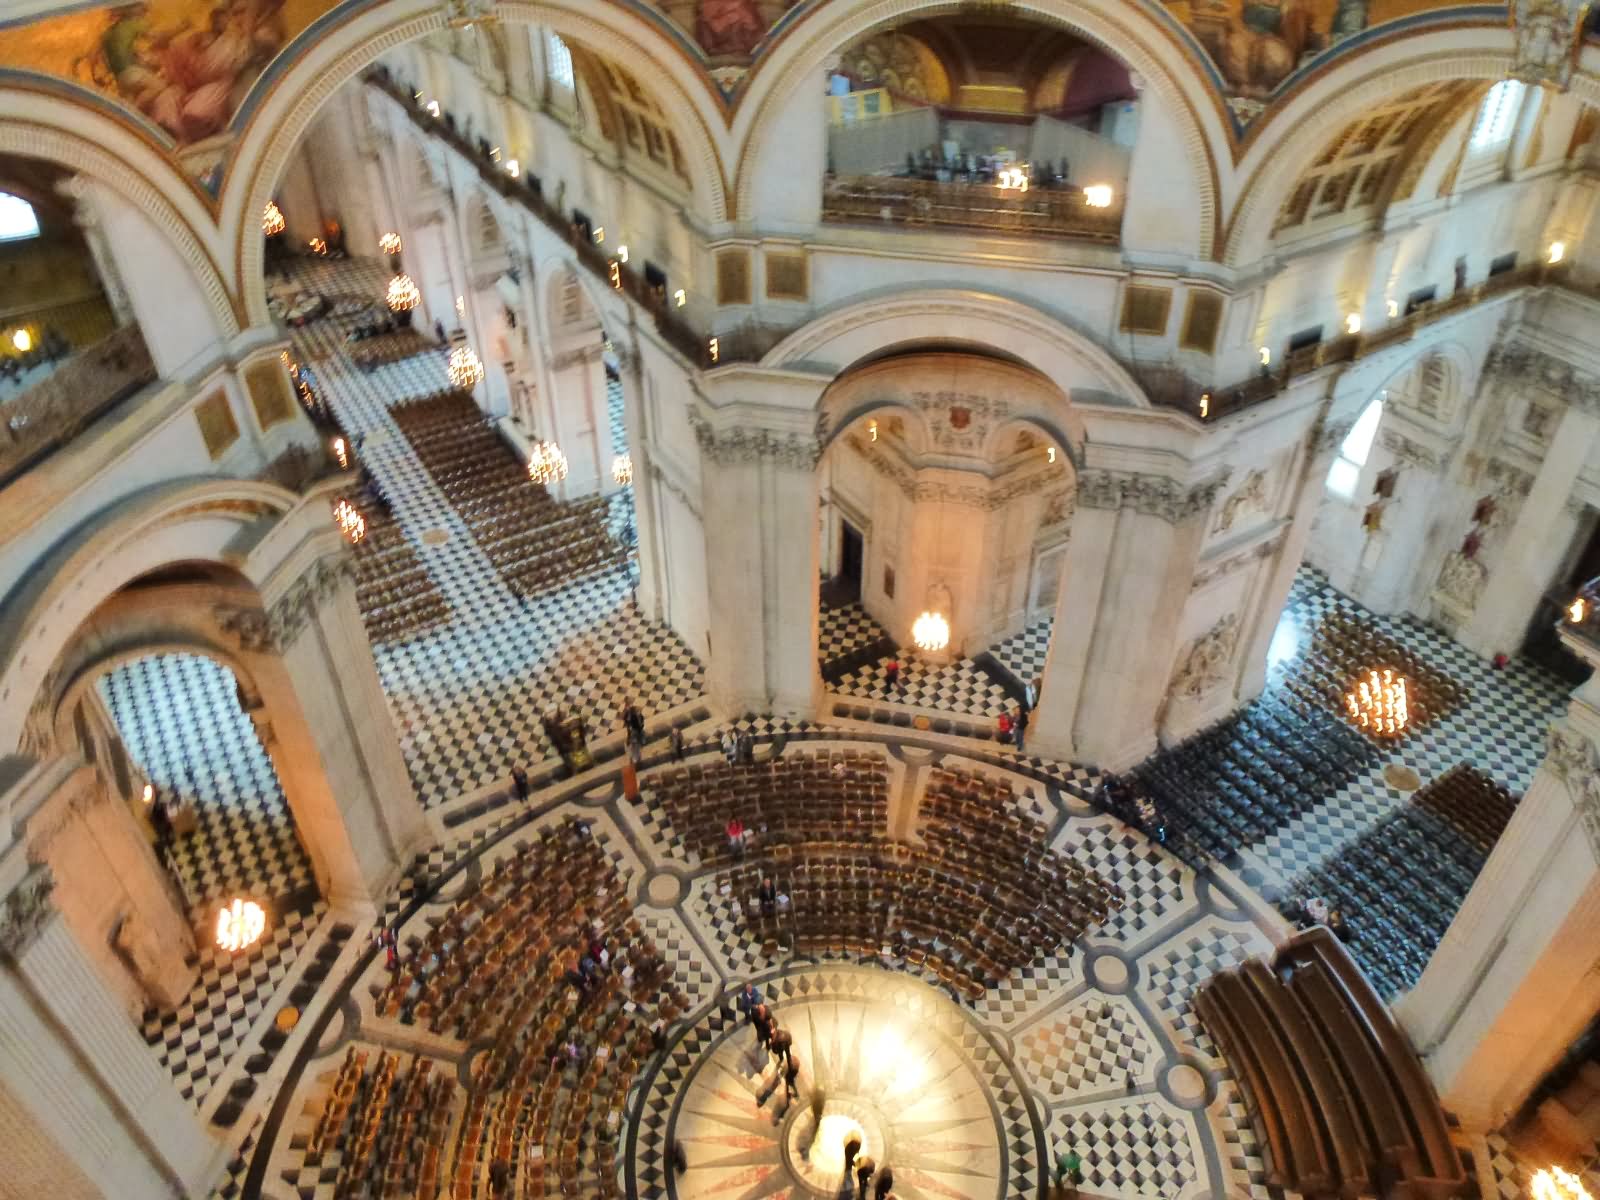 Amazing Interior View Of The St Paul's Cathedral